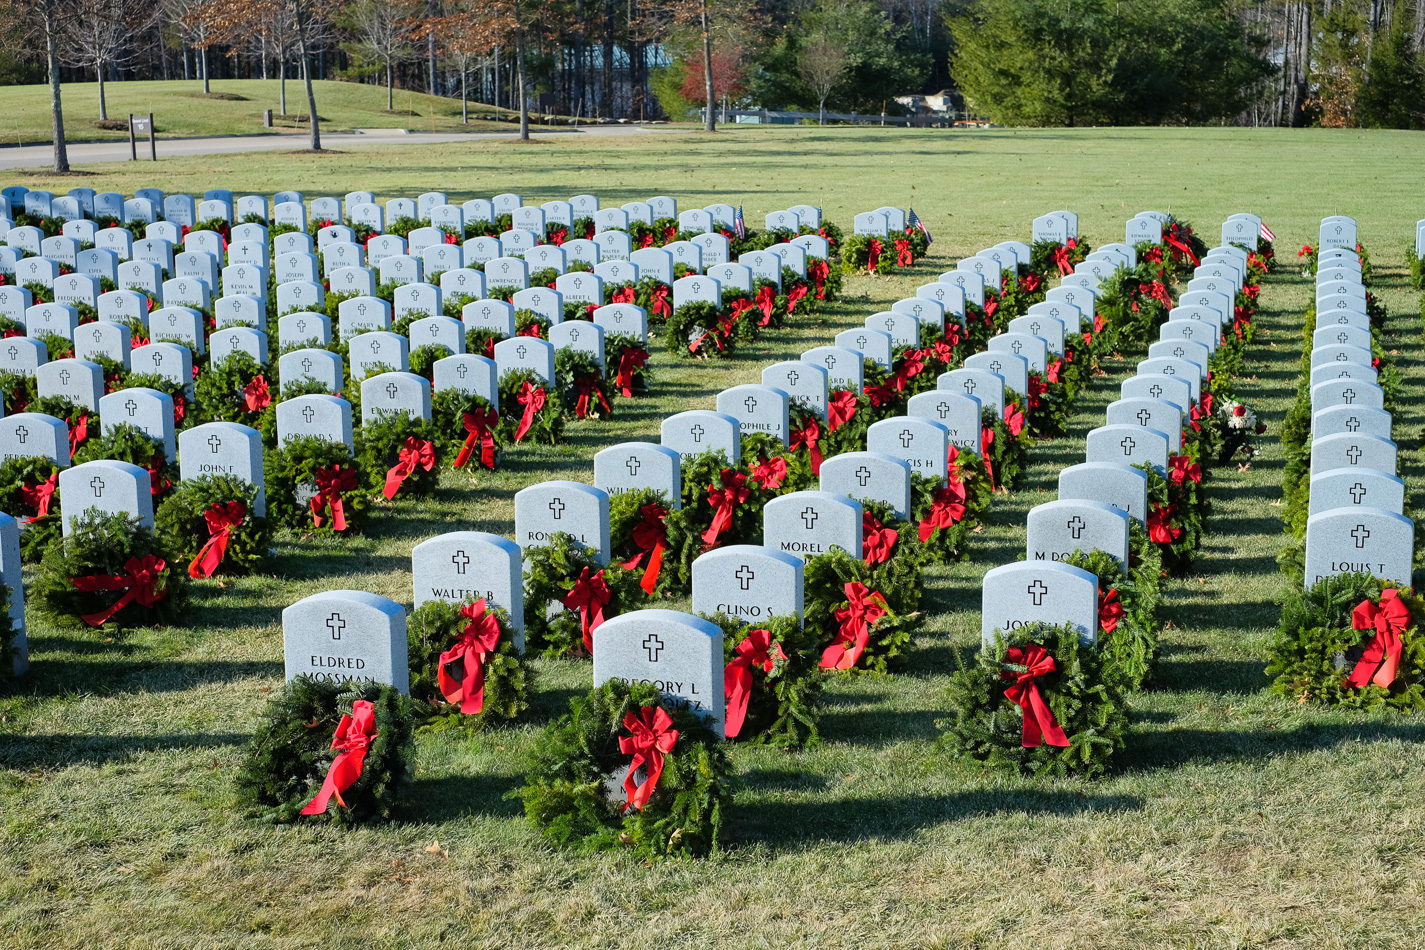 Holiday wreaths at the Massachusetts Veterans Cemetary, Winchendon, MA